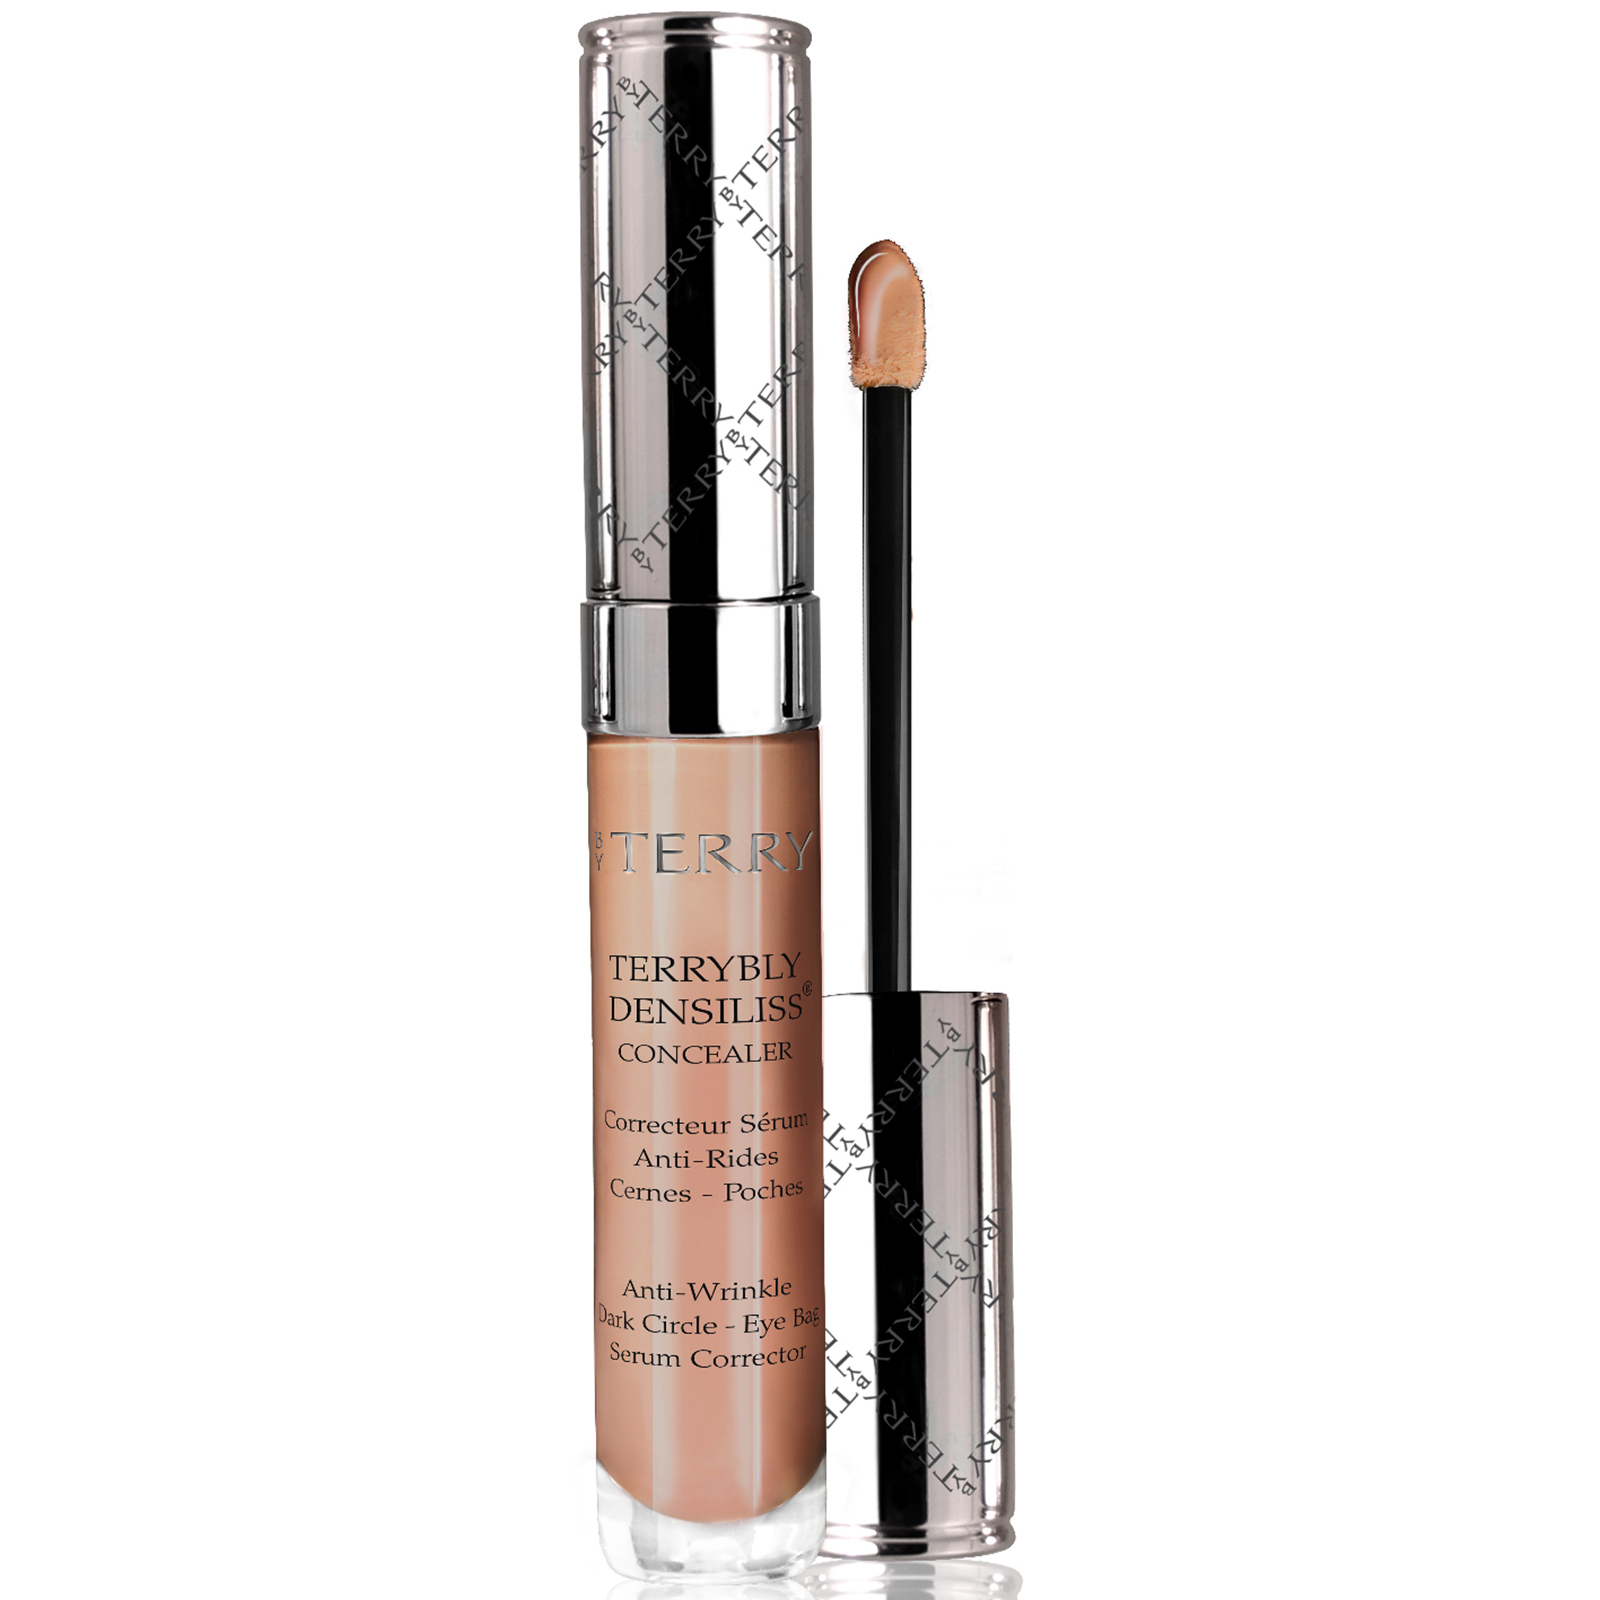 By Terry Terrybly Densiliss Concealer 7ml (Various Shades) - 0 6. Sienna Copper